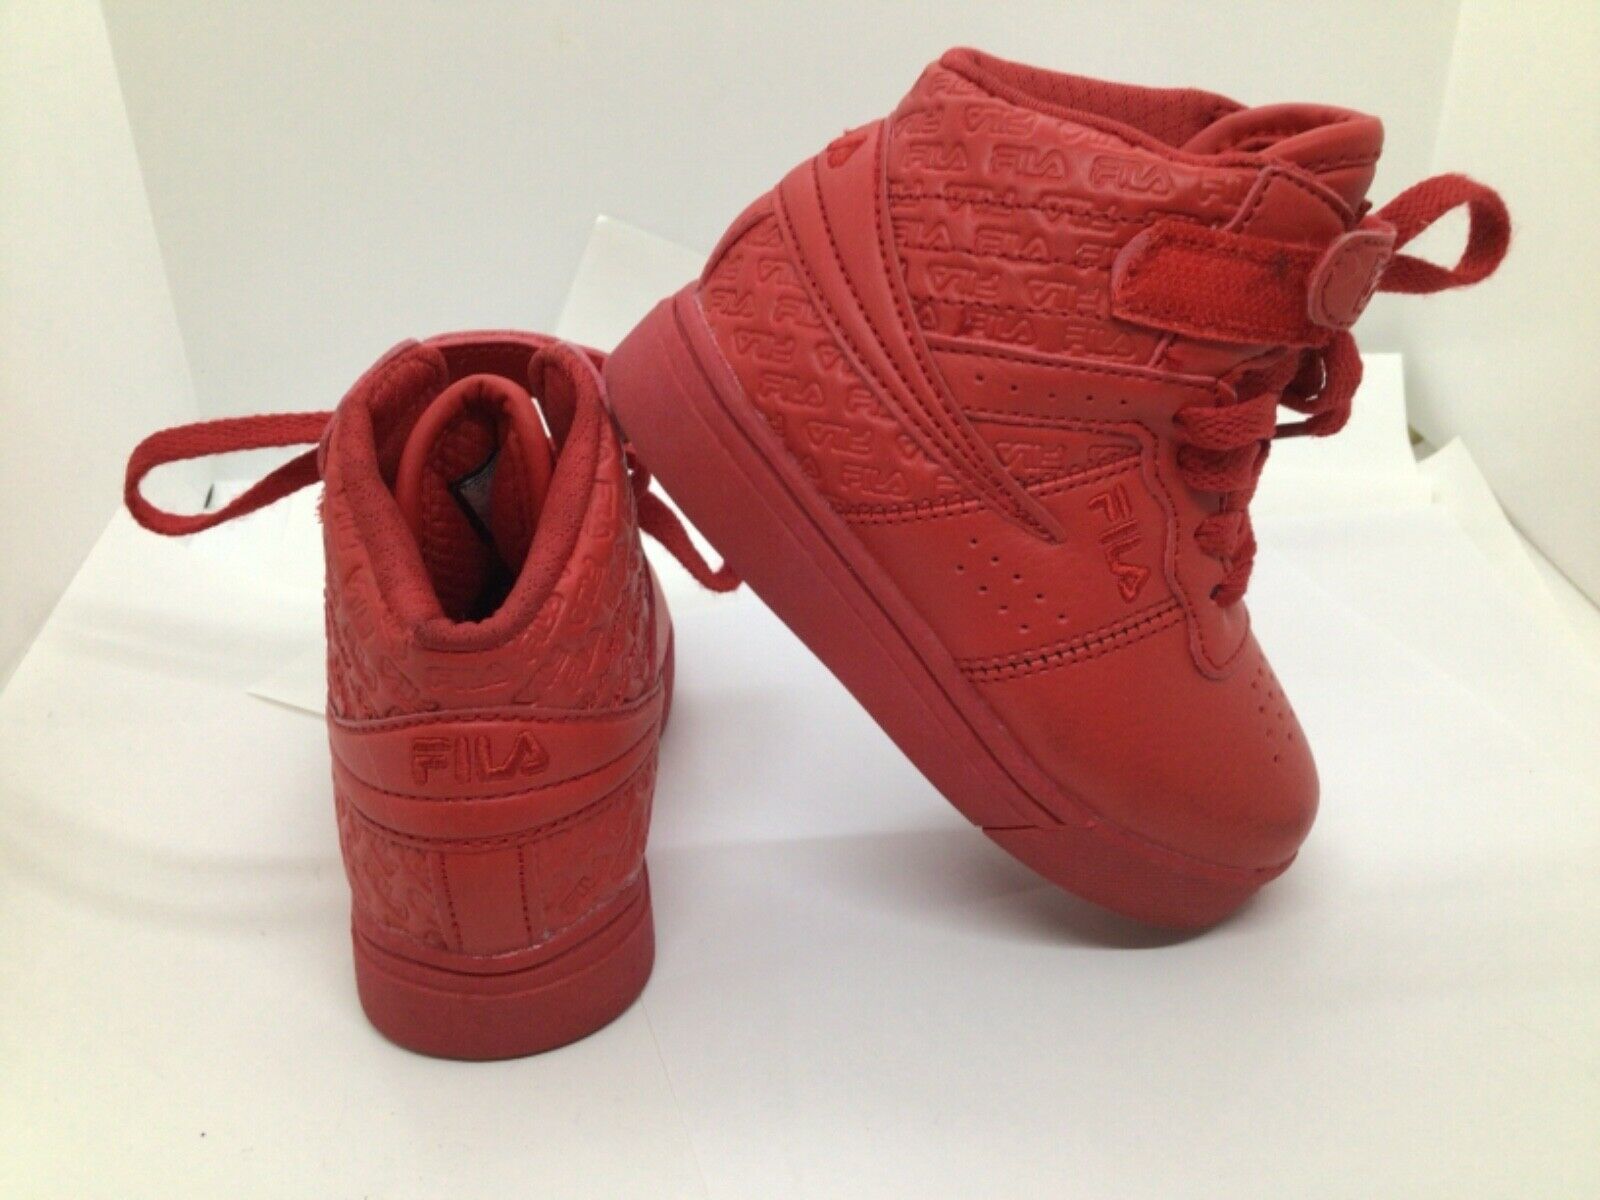 Fila 7cm00652-600 Red High Tops Kids Shoes Tie Up With Strap Basketball Size 7Y - $22.77